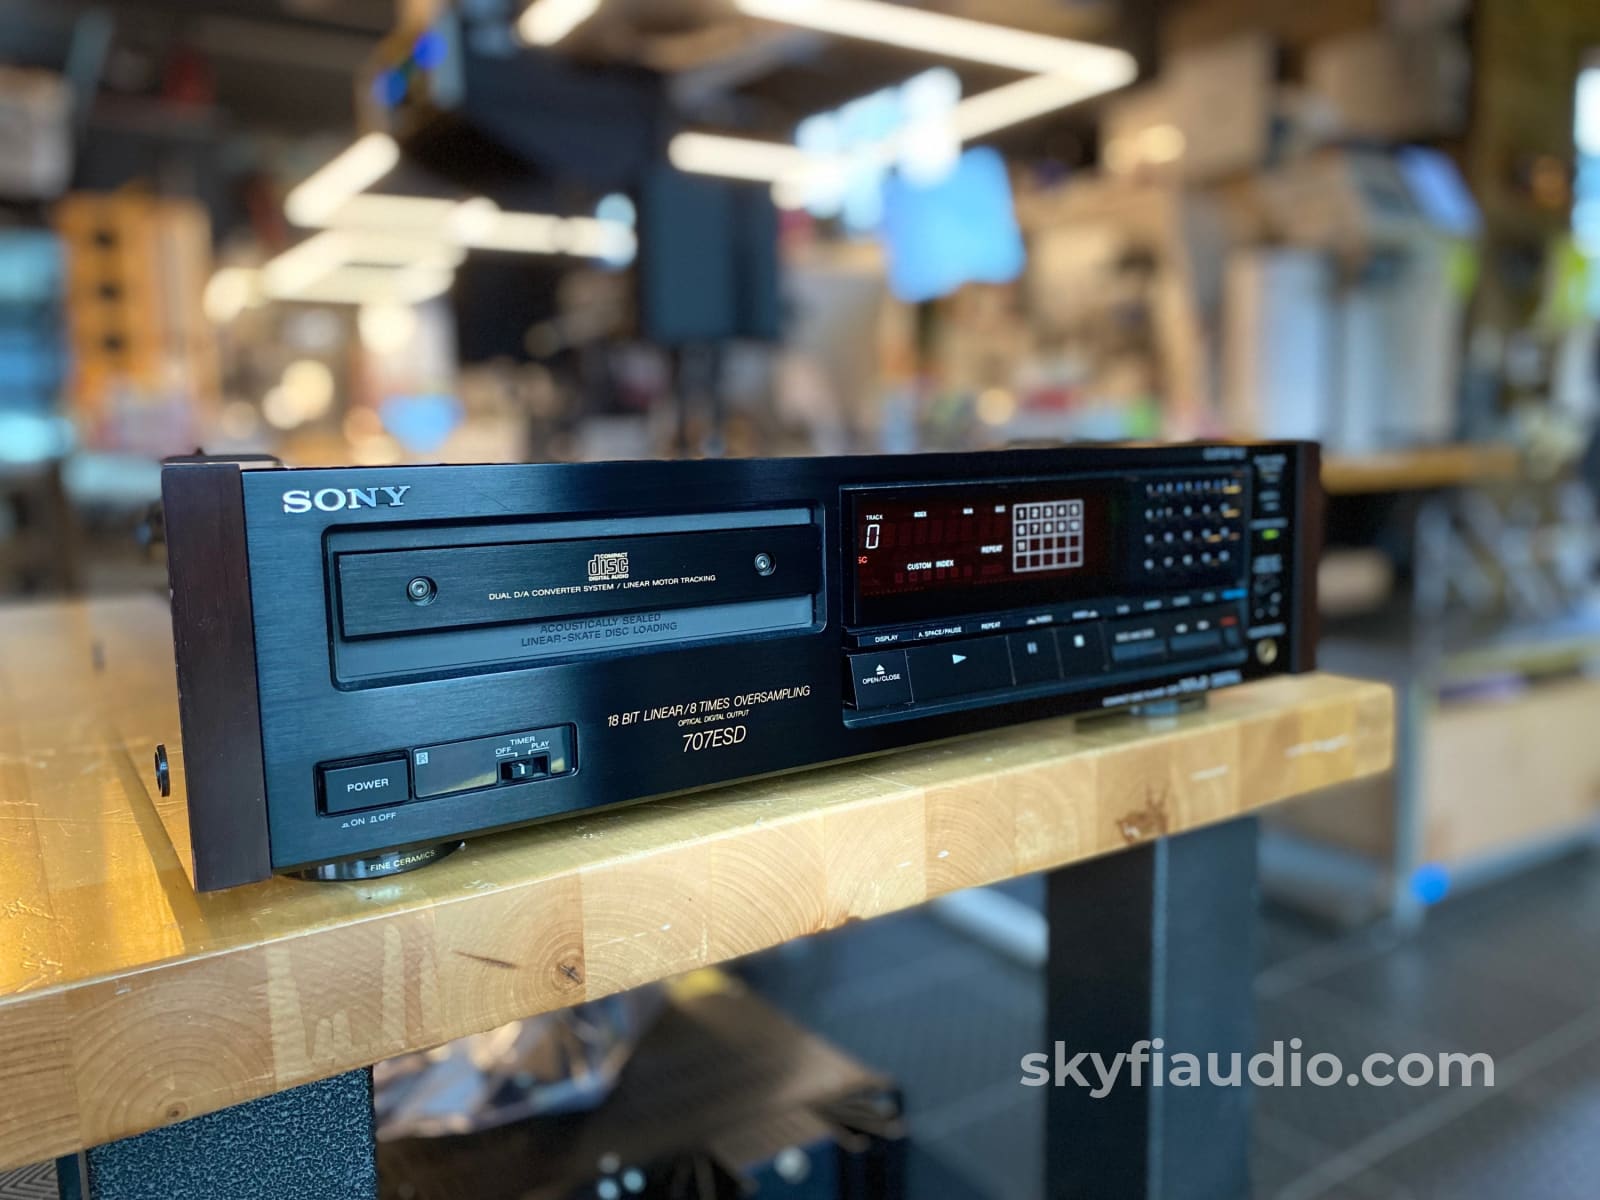 Sony Cdp-707Esd Vintage Cd Player With Remote - Our Favorite! + Digital